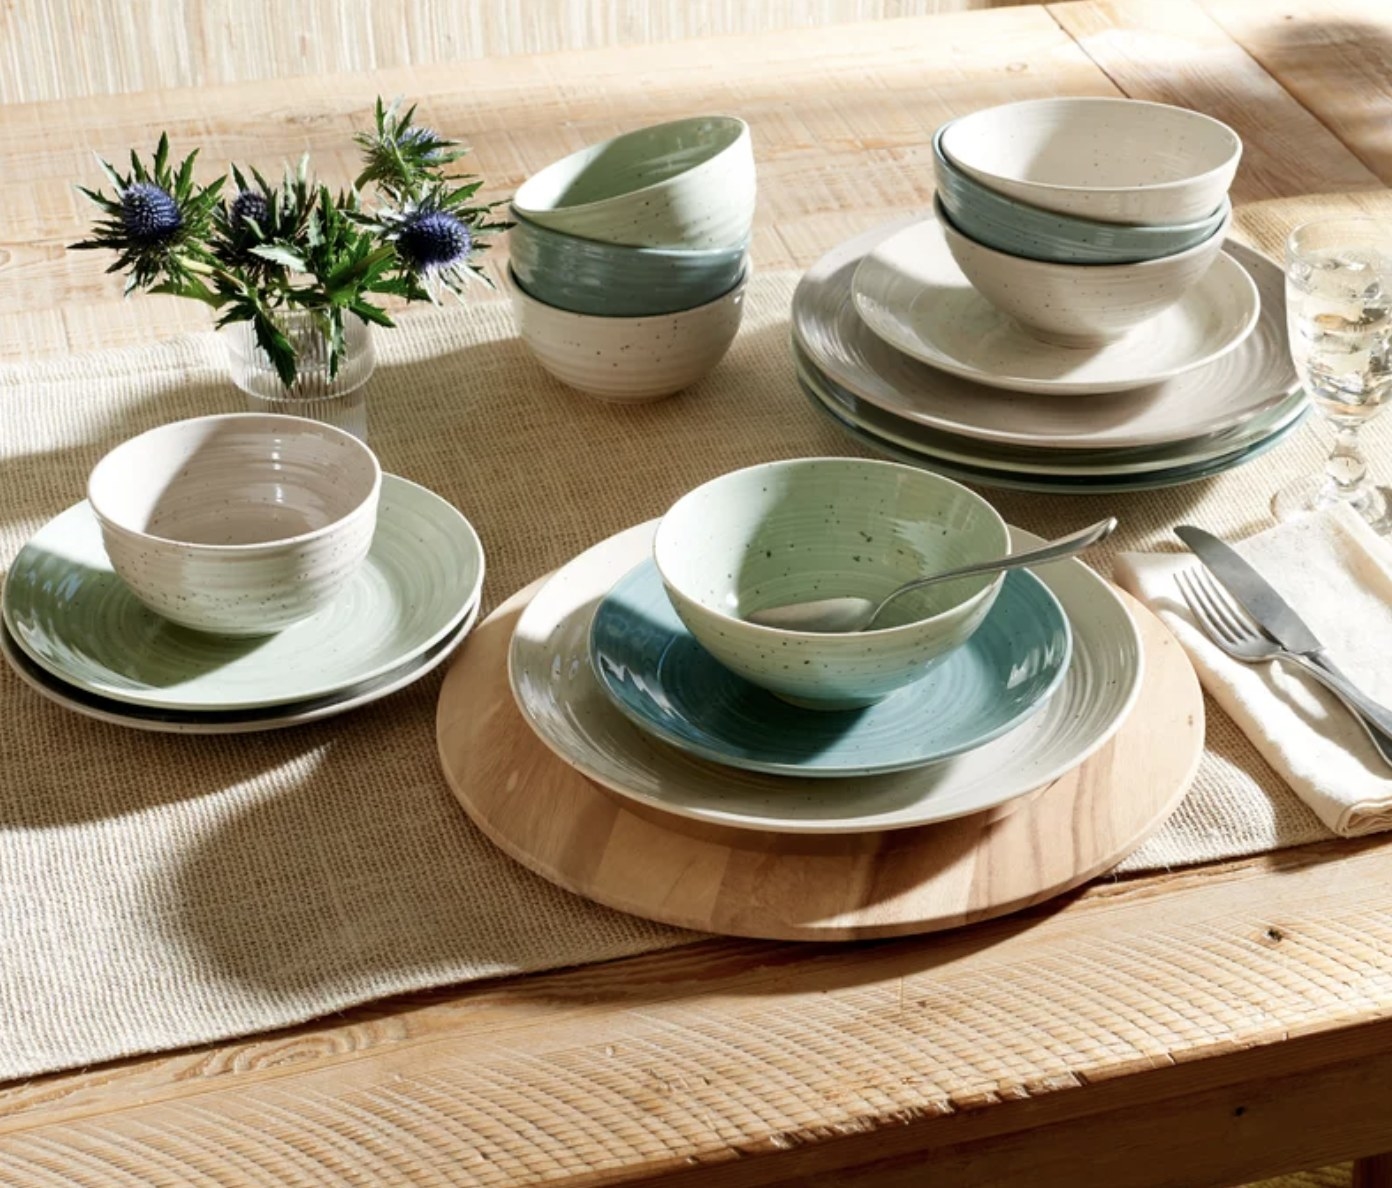 The green, blue and cream dishes set out on table